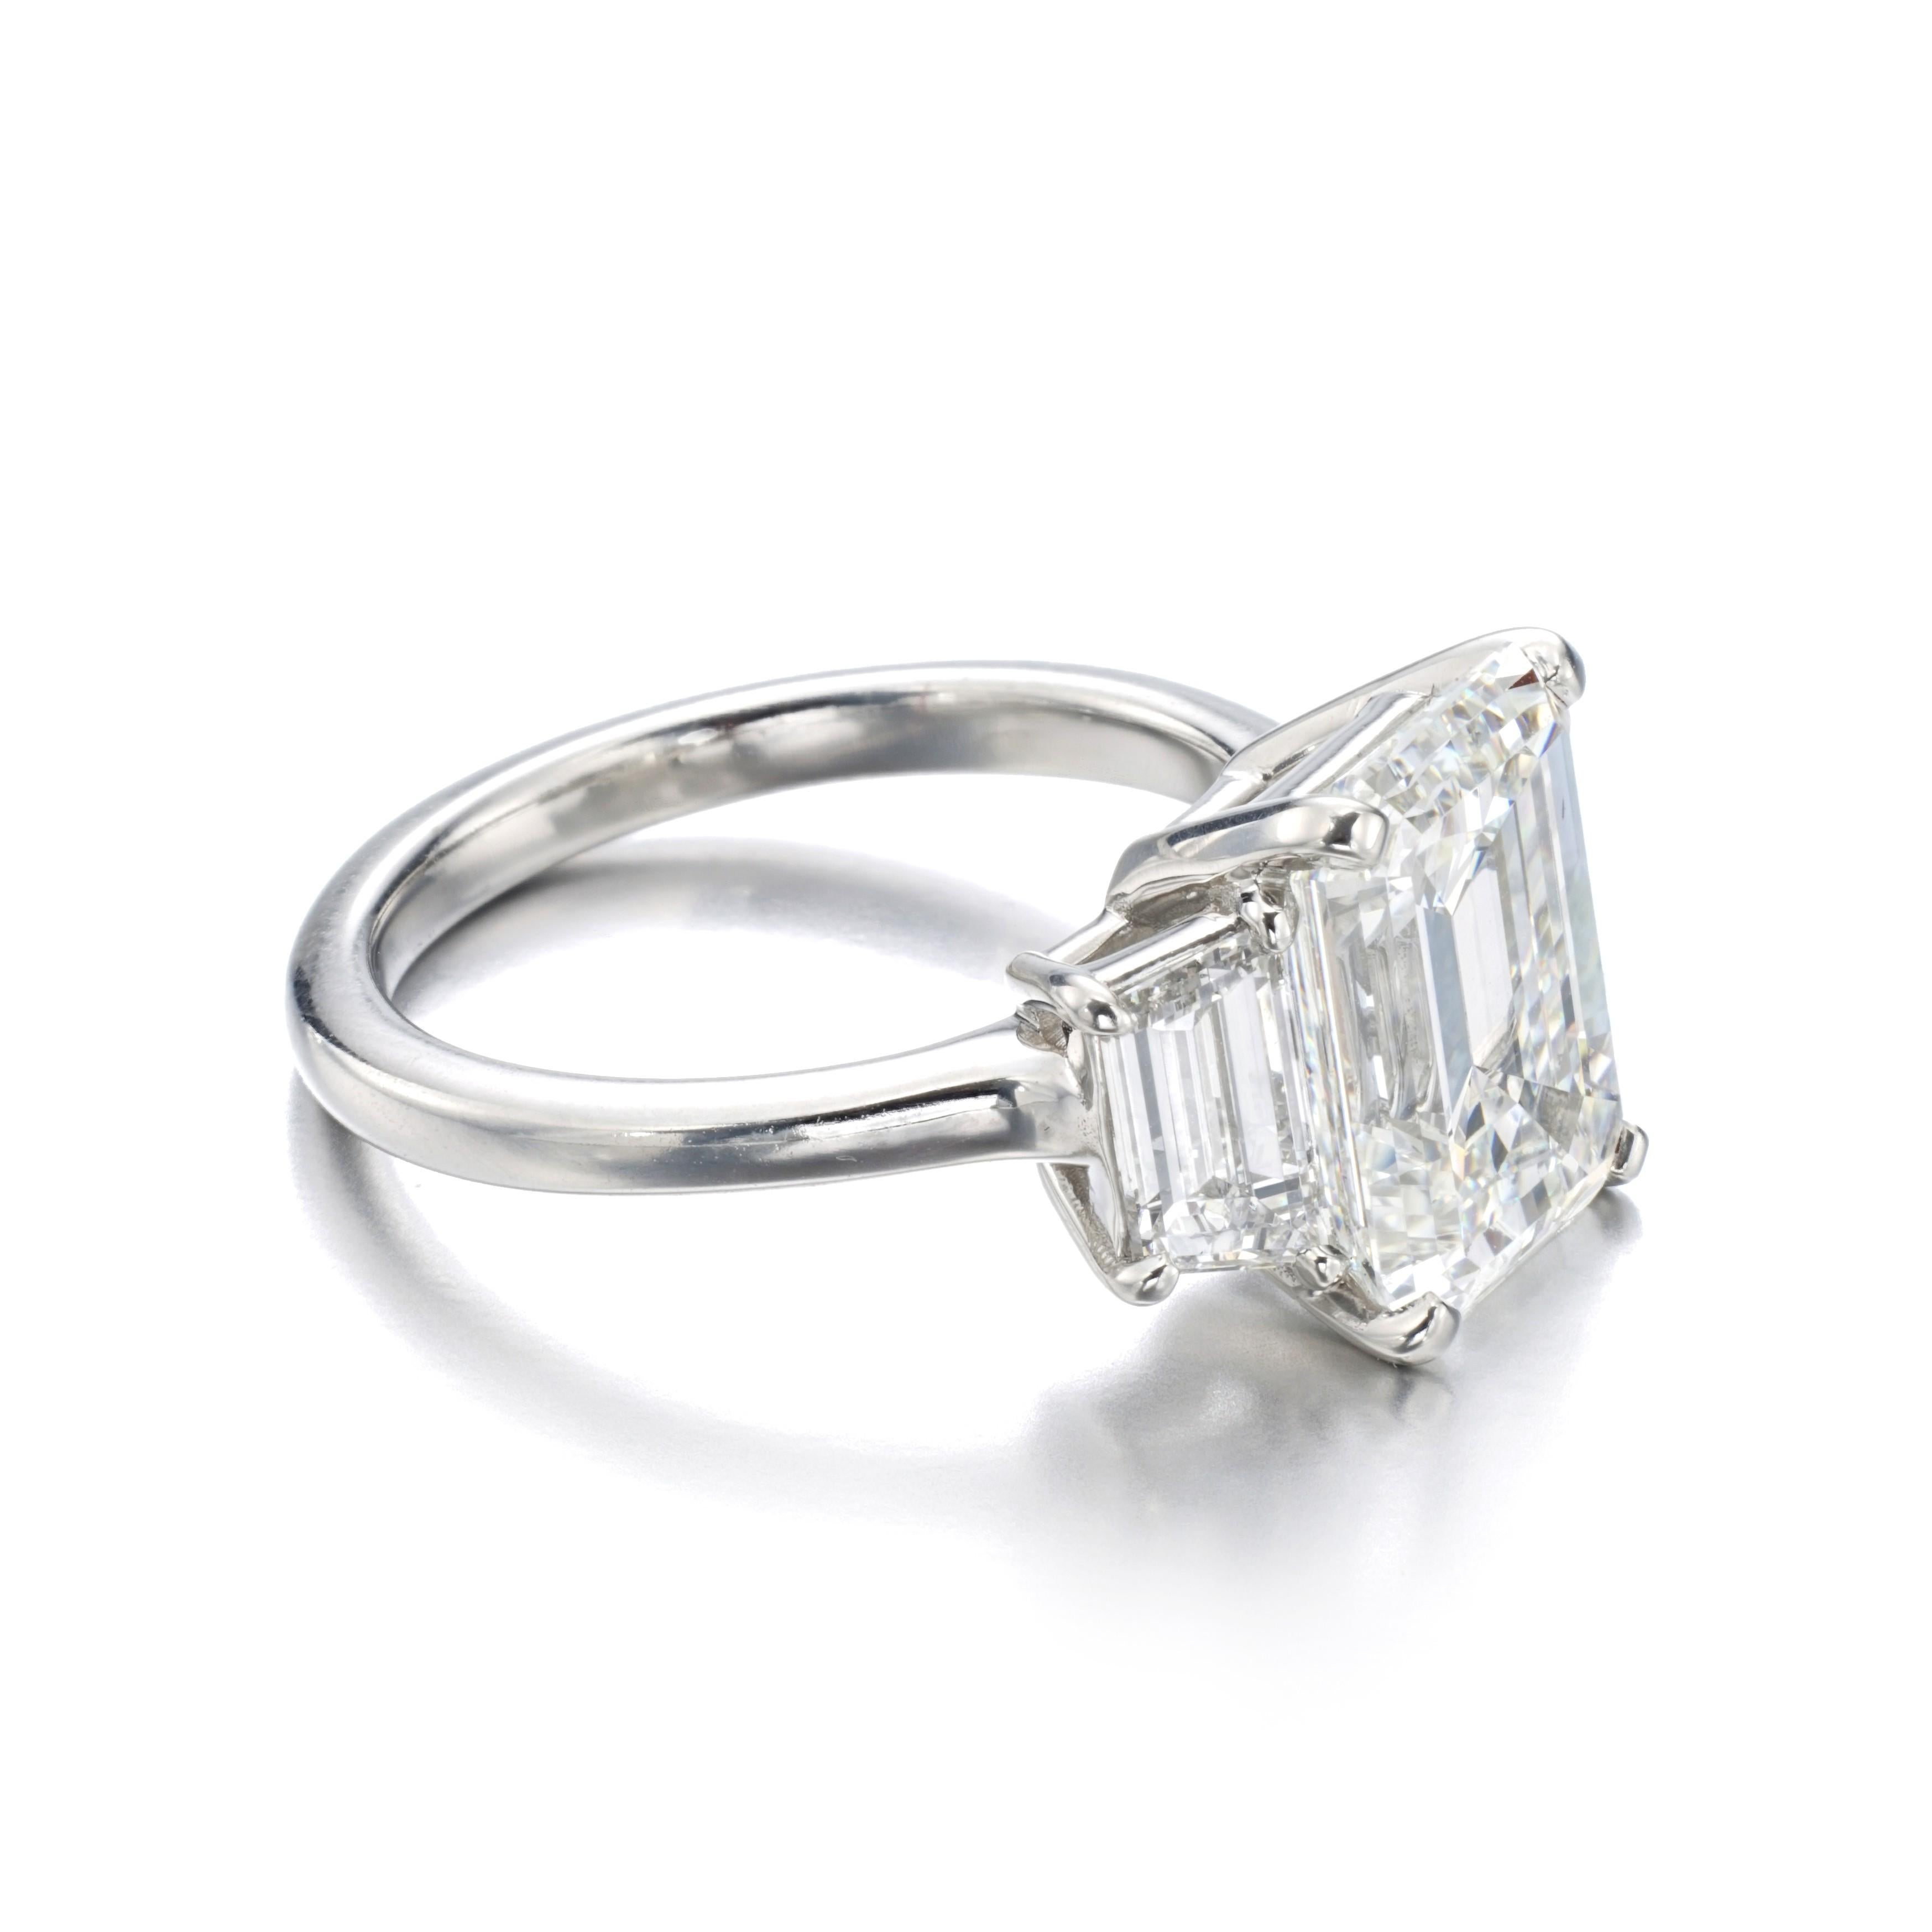 An exquisite emerald cut diamond ring with perfect proportions INTERNALLY FLAWLESS clarity and D color with excellent polish and excellent symmetry.

This ring has been handmade in Italy and is mounted in 18 carats white gold
